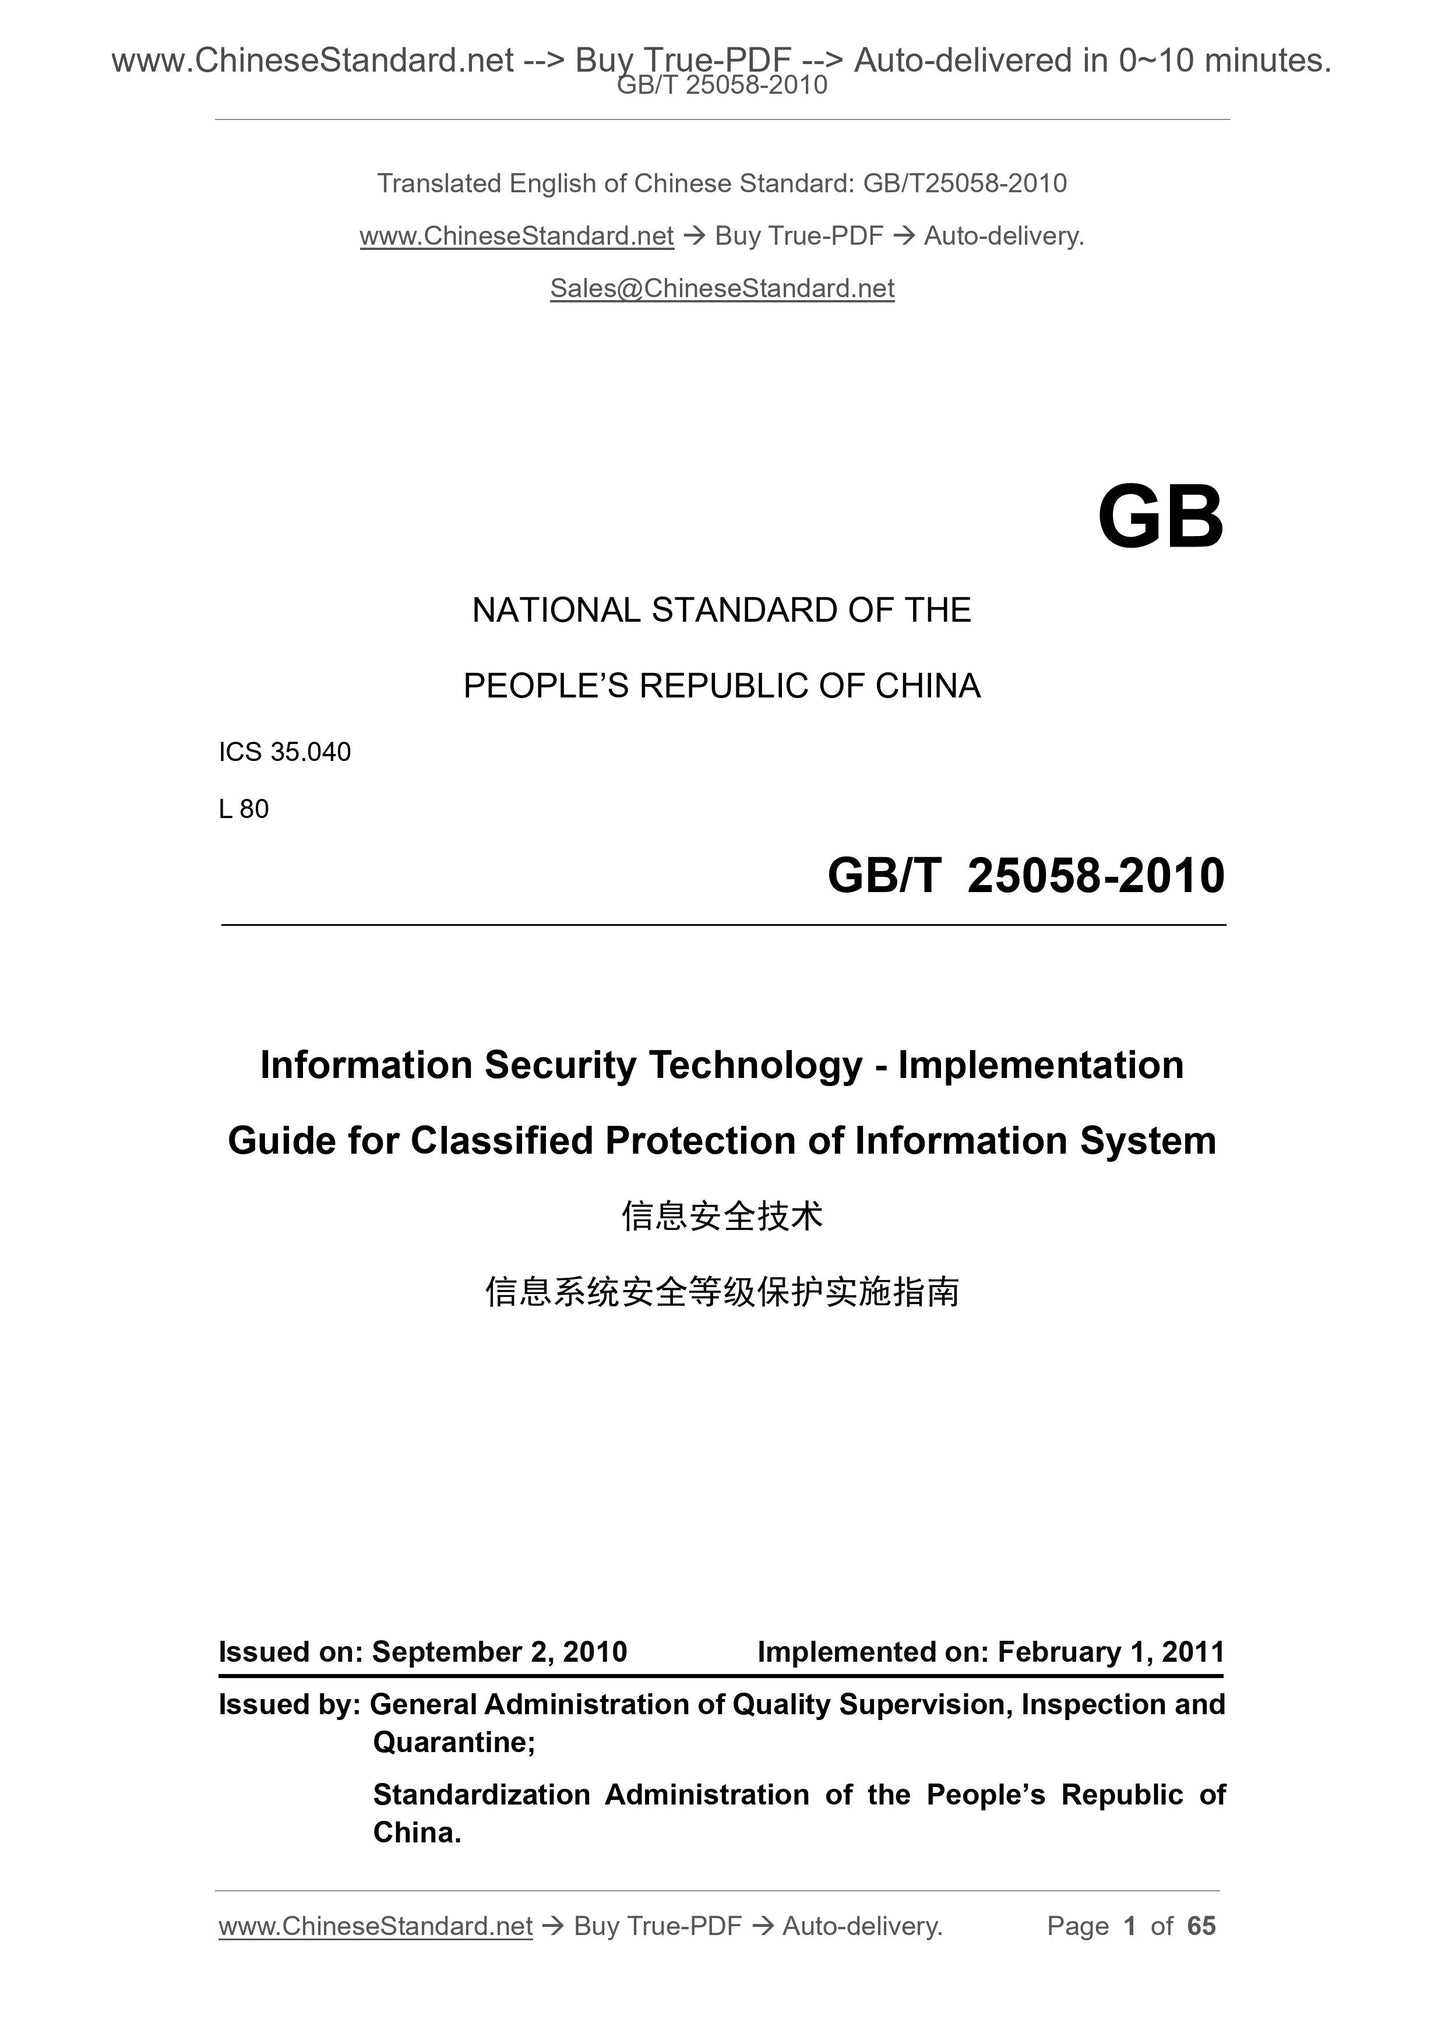 GB/T 25058-2010 Page 1